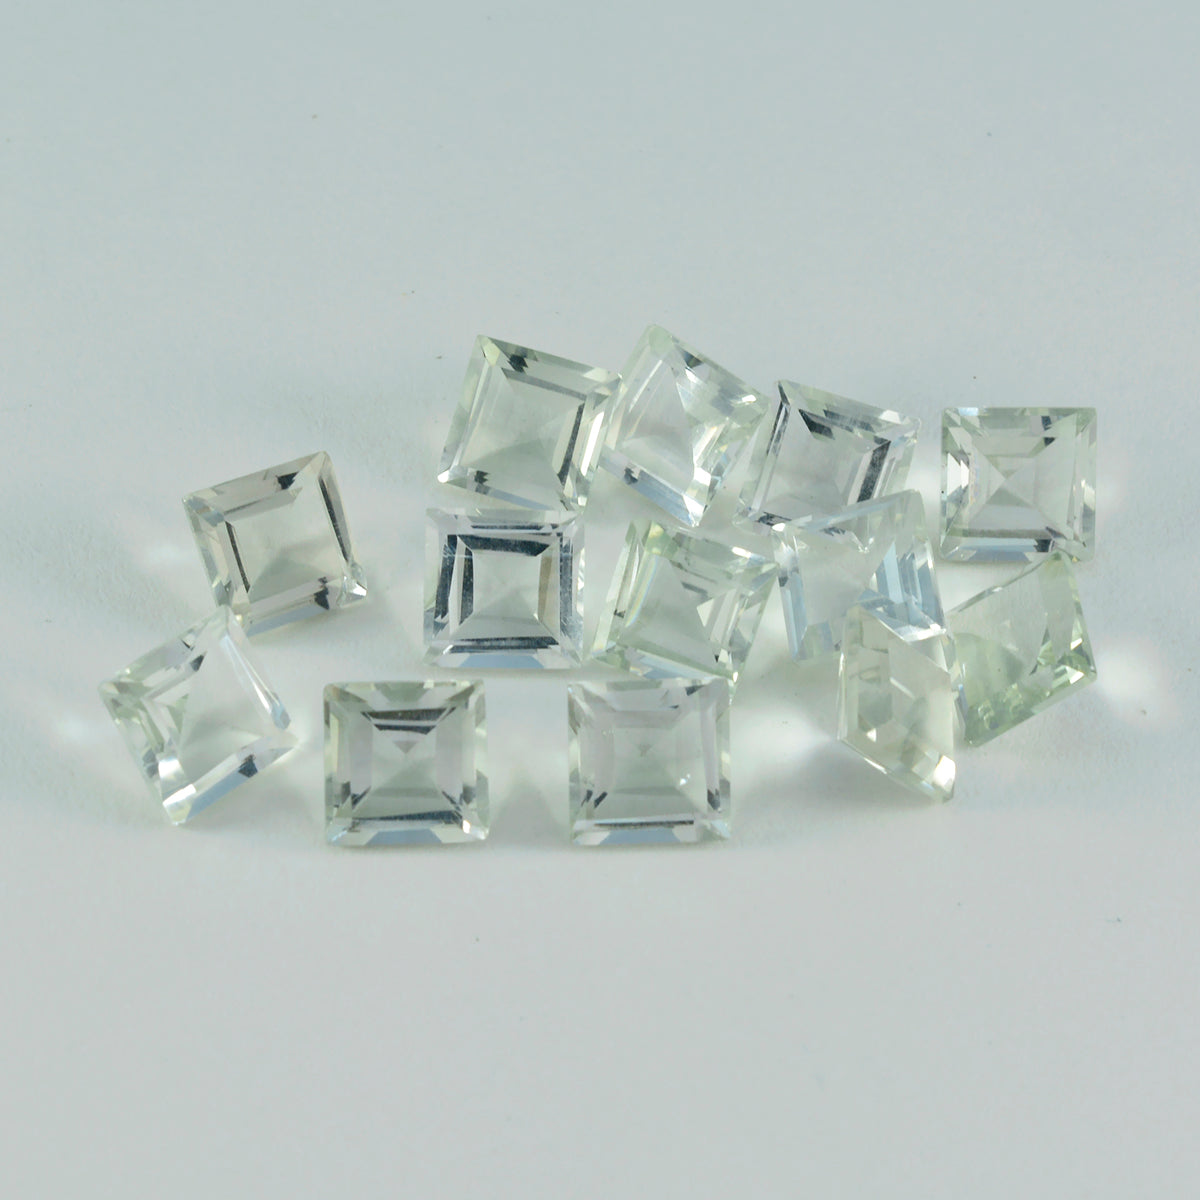 Riyogems 1PC Green Amethyst Faceted 6x6 mm Square Shape awesome Quality Stone